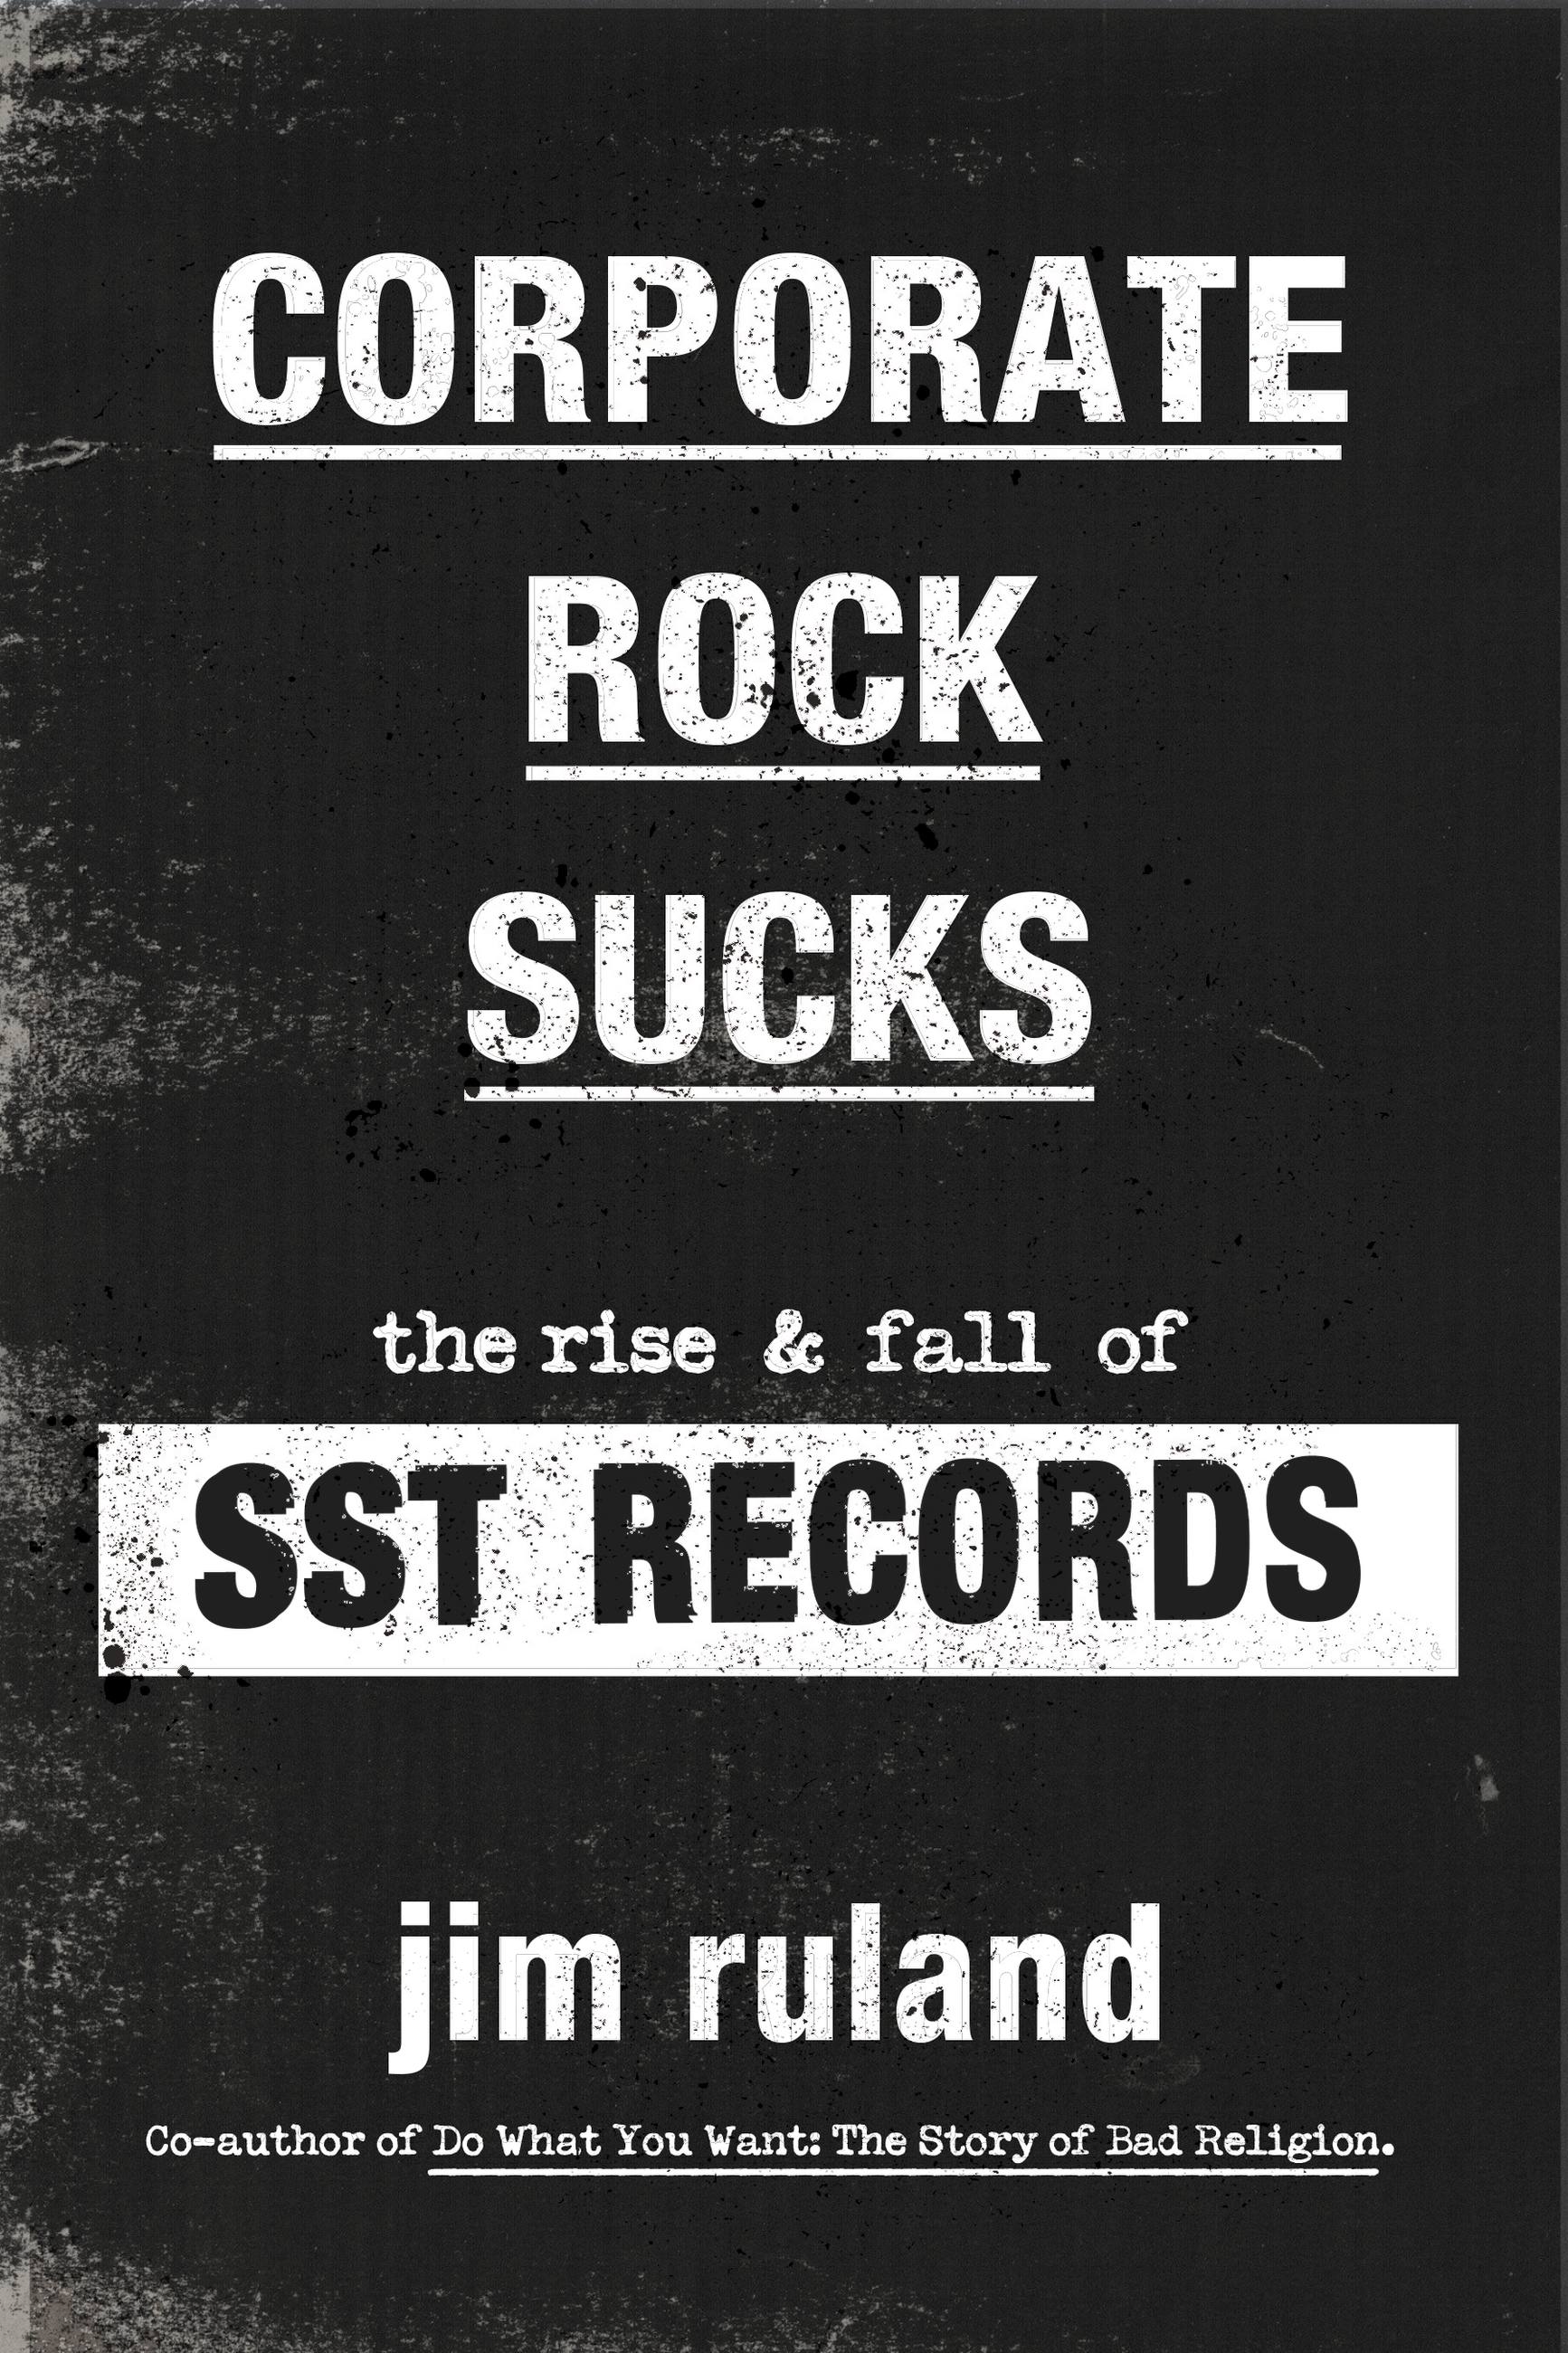 Corporate Rock Sucks by Jim Ruland Hachette Book Group photo pic image